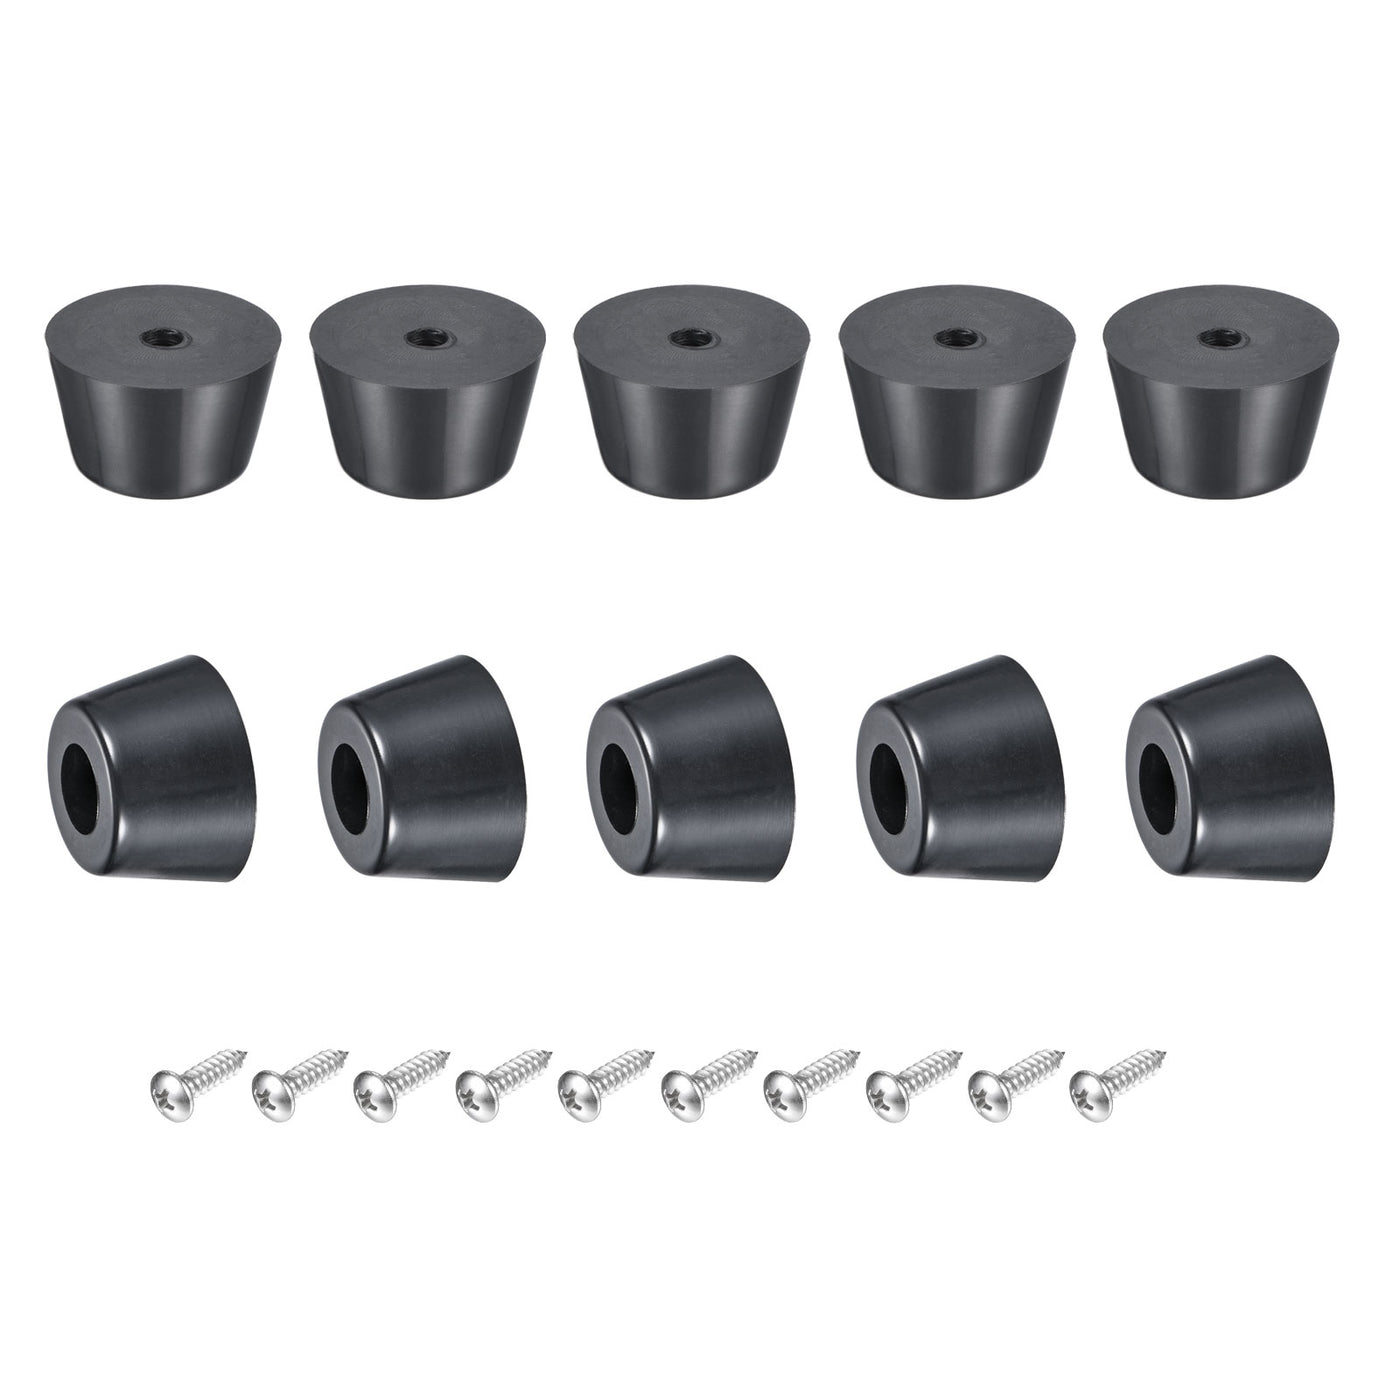 uxcell Uxcell Rubber Bumper Feet, 0.59" H x 0.98" W Round Pads with Stainless Steel Washer and Screws for Furniture, Appliances, Electronics 16 Pcs